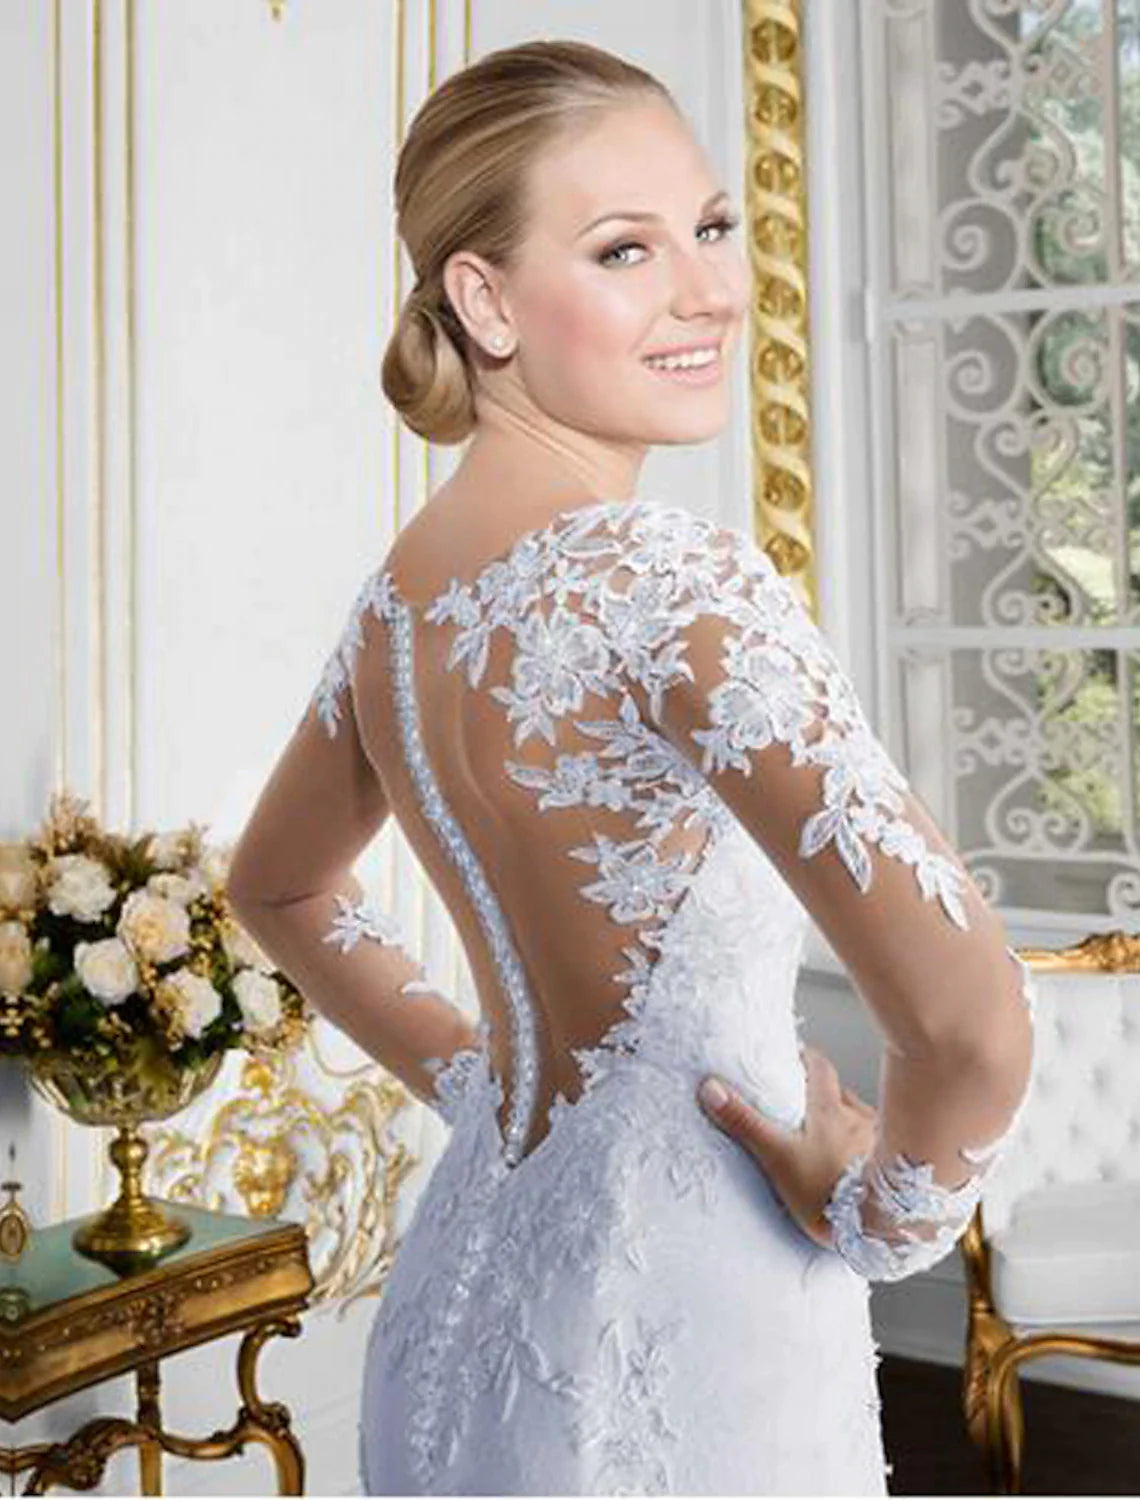 Open Back Sexy Formal Fall Wedding Dresses Mermaid / Trumpet Illusion Neck Long Sleeve Chapel Train Lace Bridal Gowns With Lace Appliques